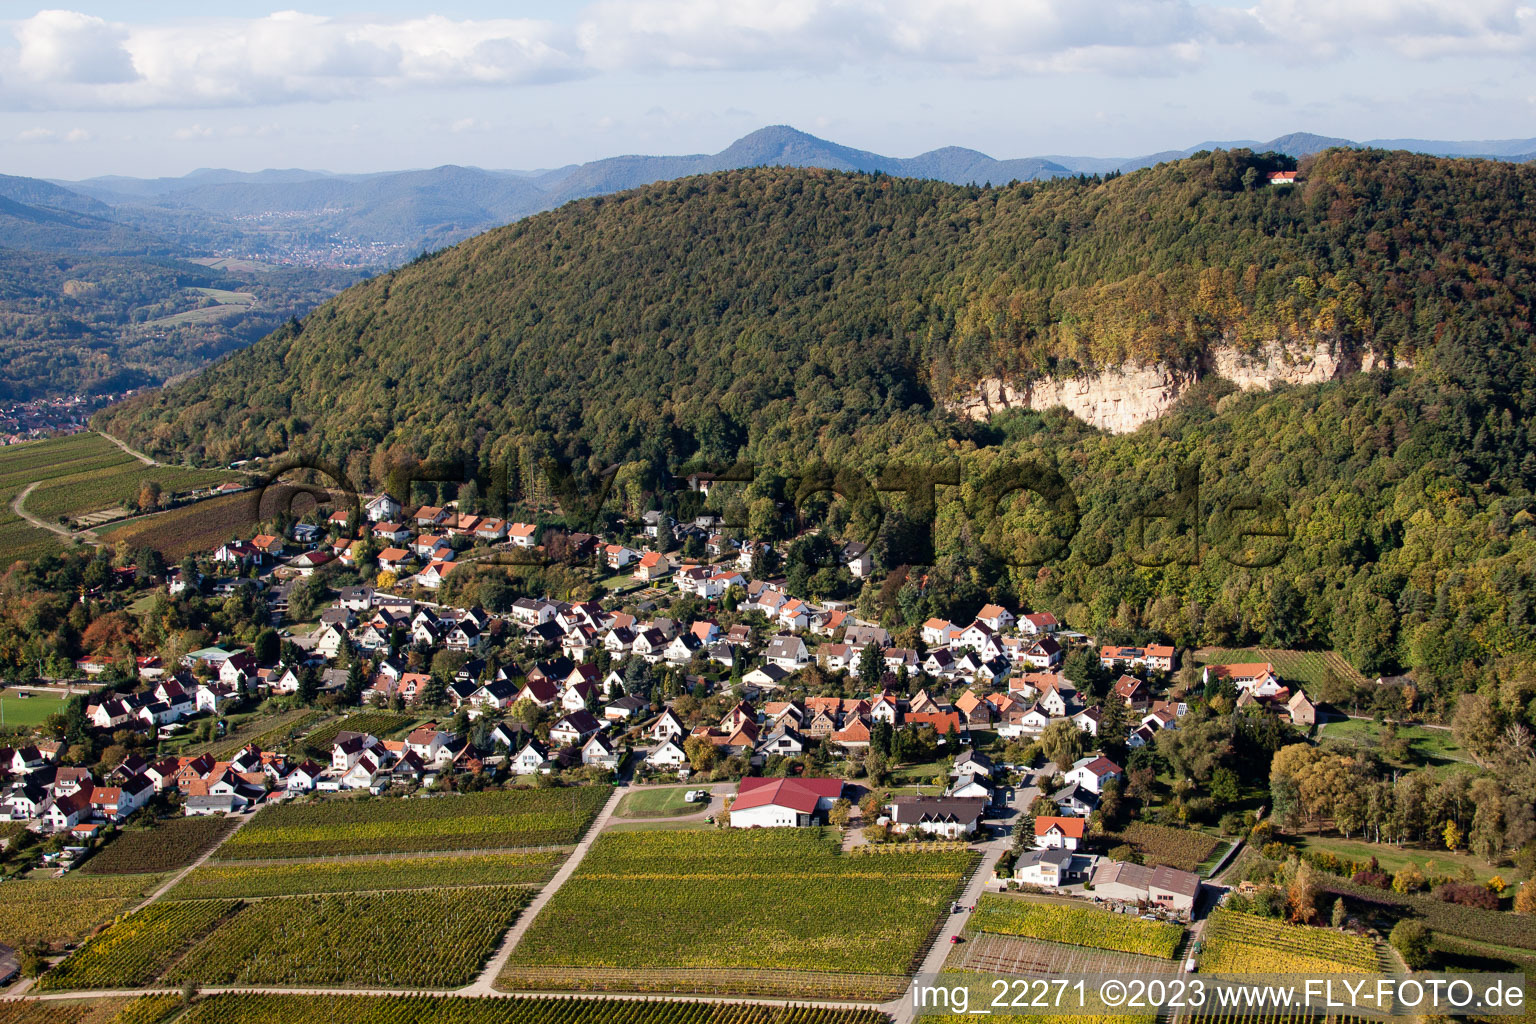 Drone recording of Frankweiler in the state Rhineland-Palatinate, Germany